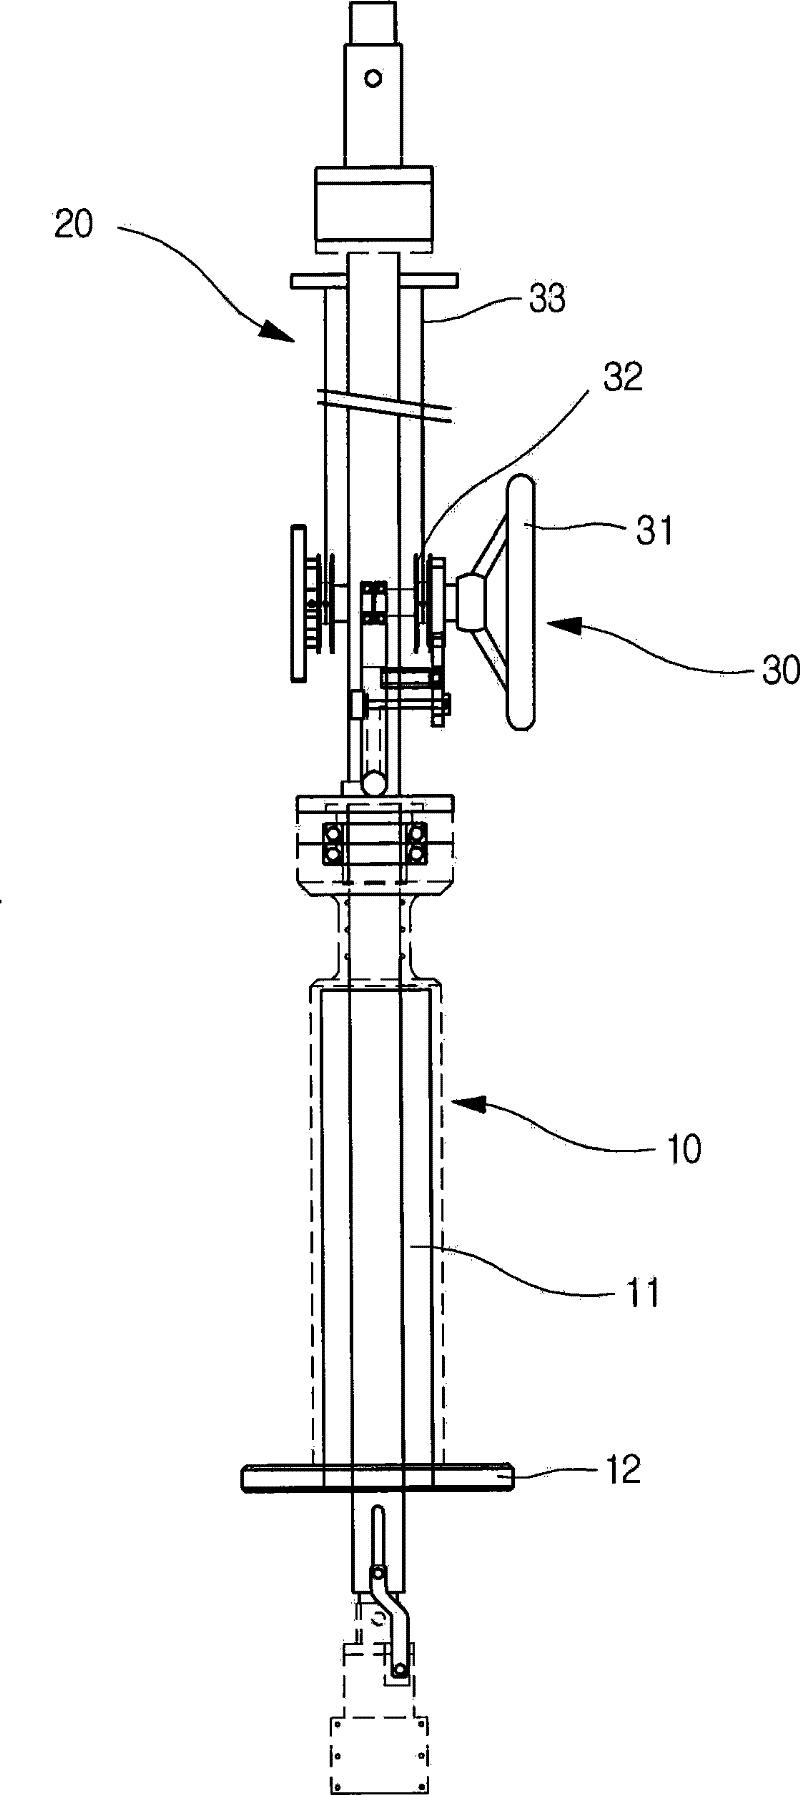 Apparatus for photographing pipe without suspension of water supply and system for controlling the same